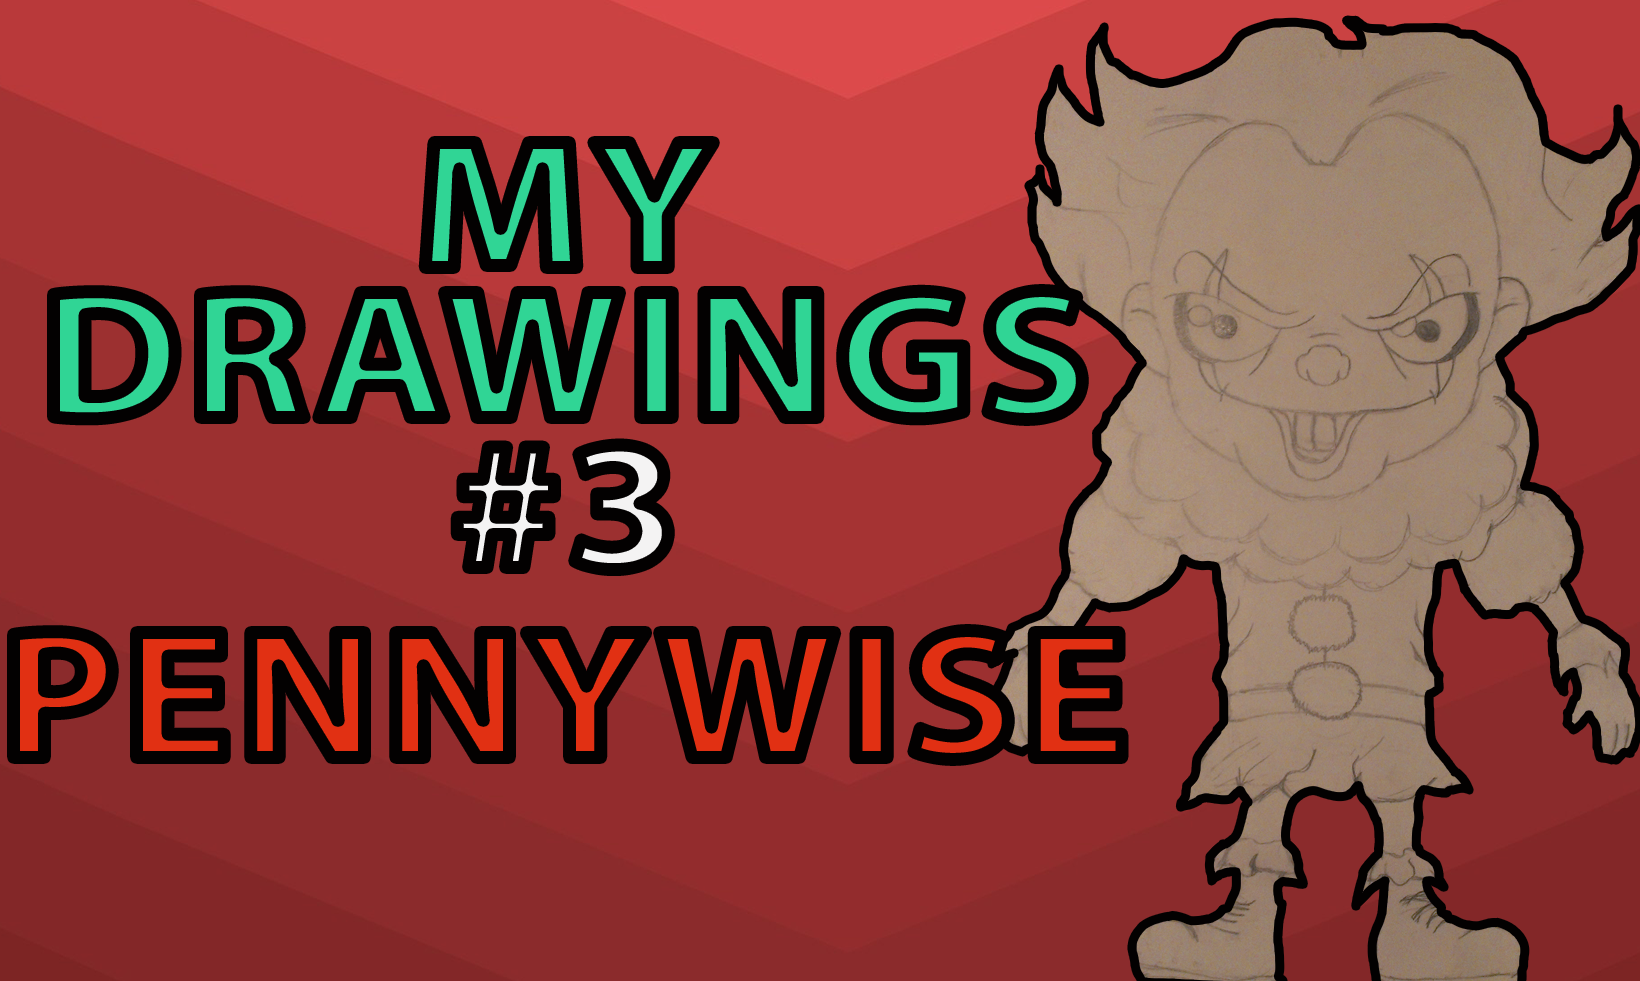 My drawings PENNYWISE png.png